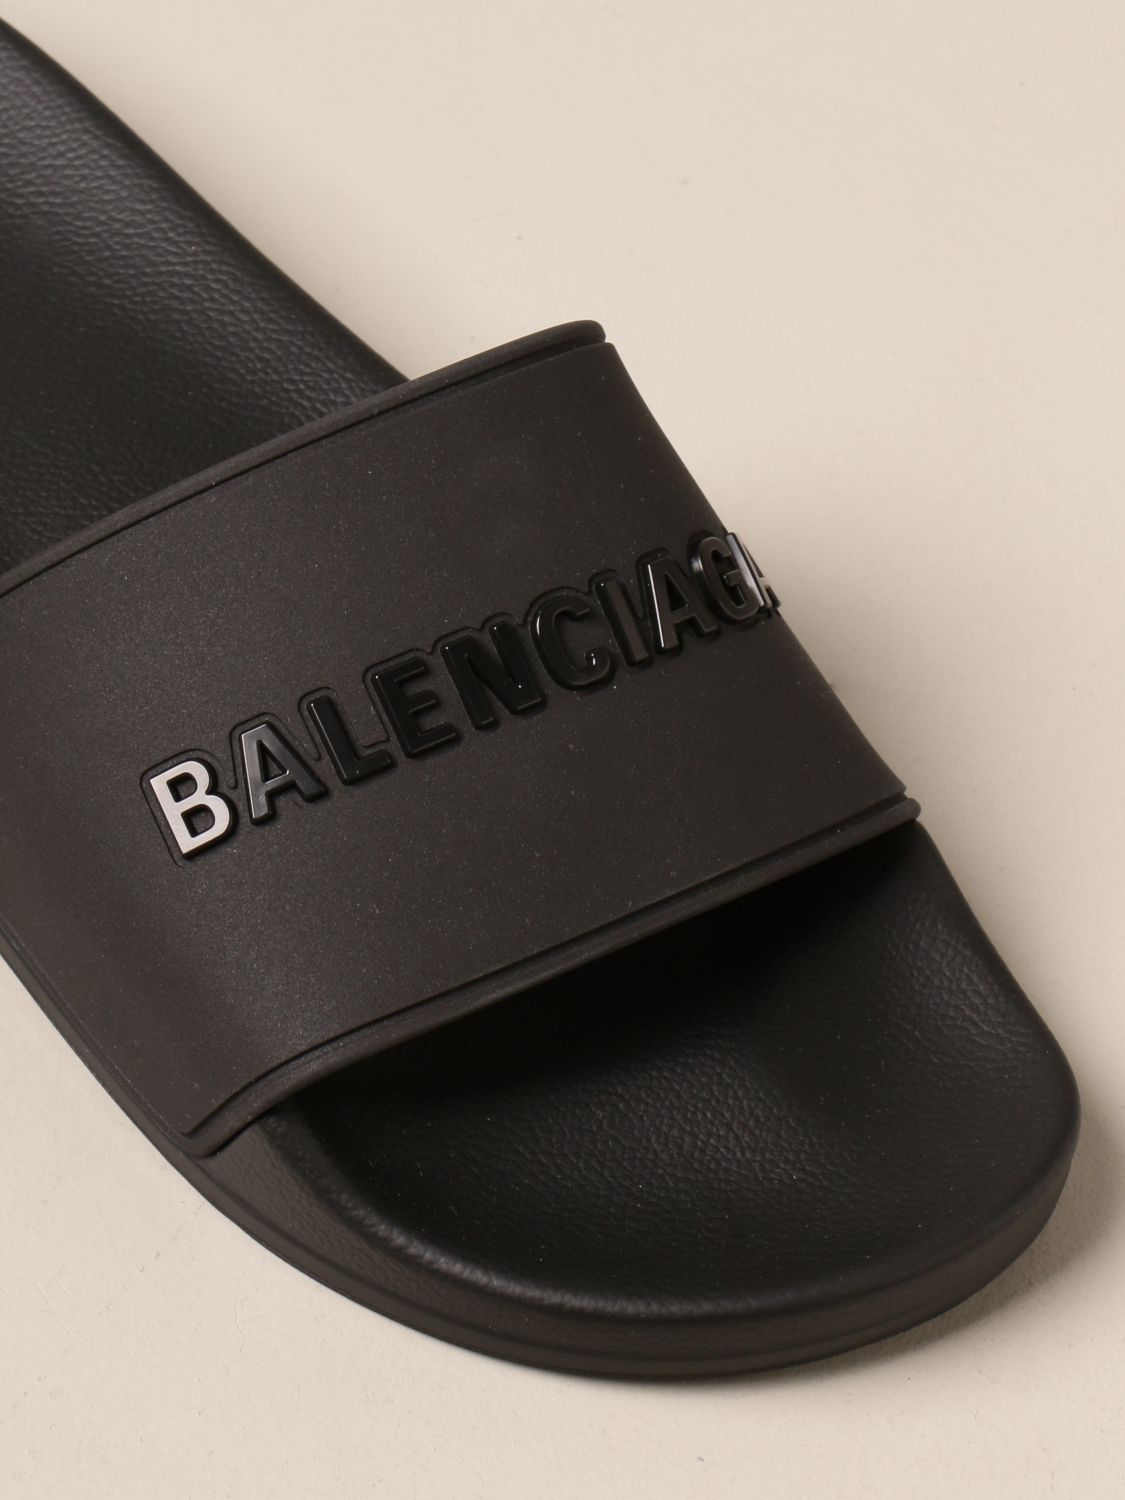 BALENCIAGA: Slide sandals in rubber with logo - Black | Flat Sandals ...